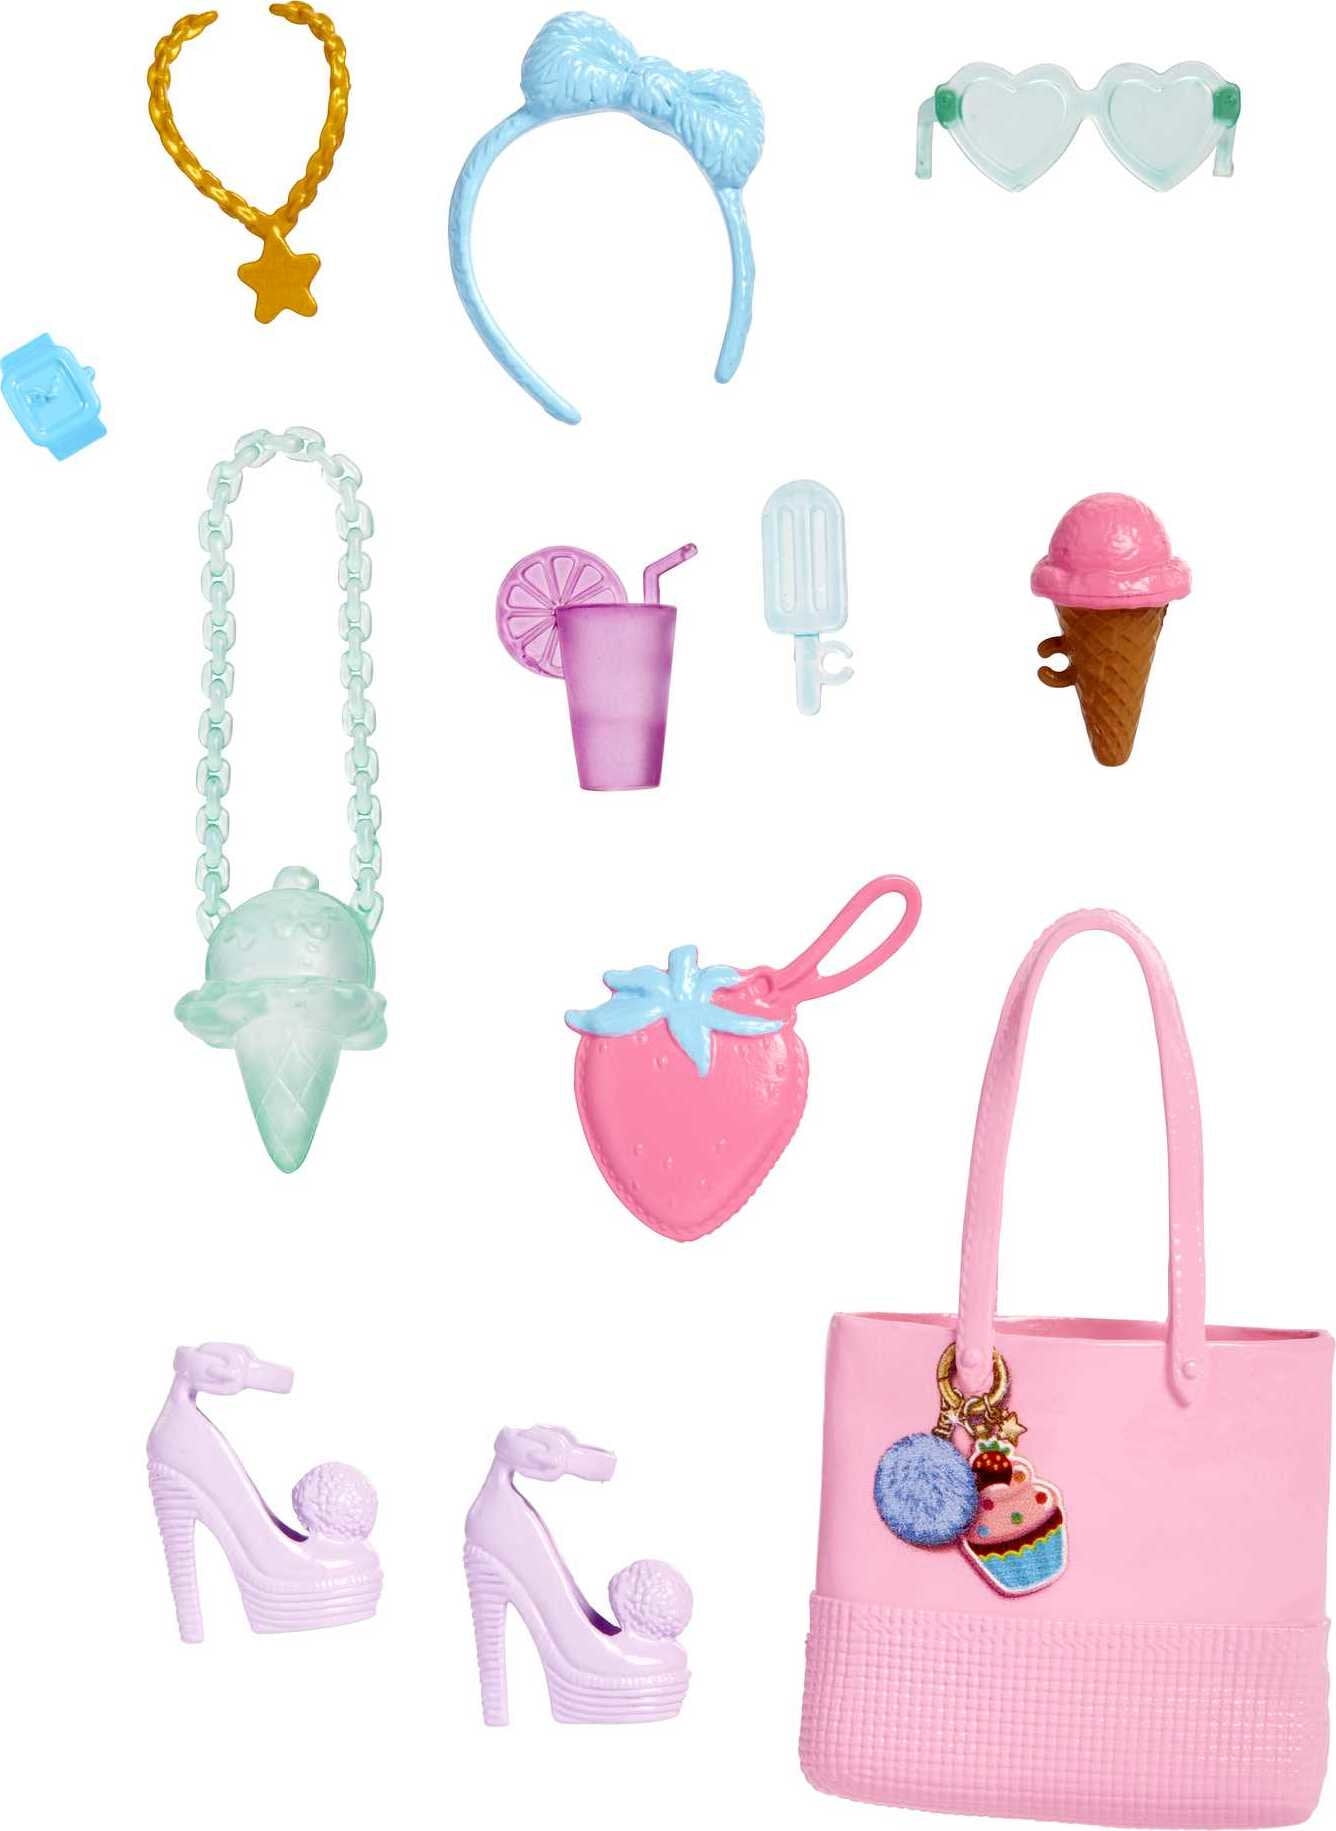 Barbie Accessory Pack, 11 Dessert and Candy-Themed Storytelling Pieces